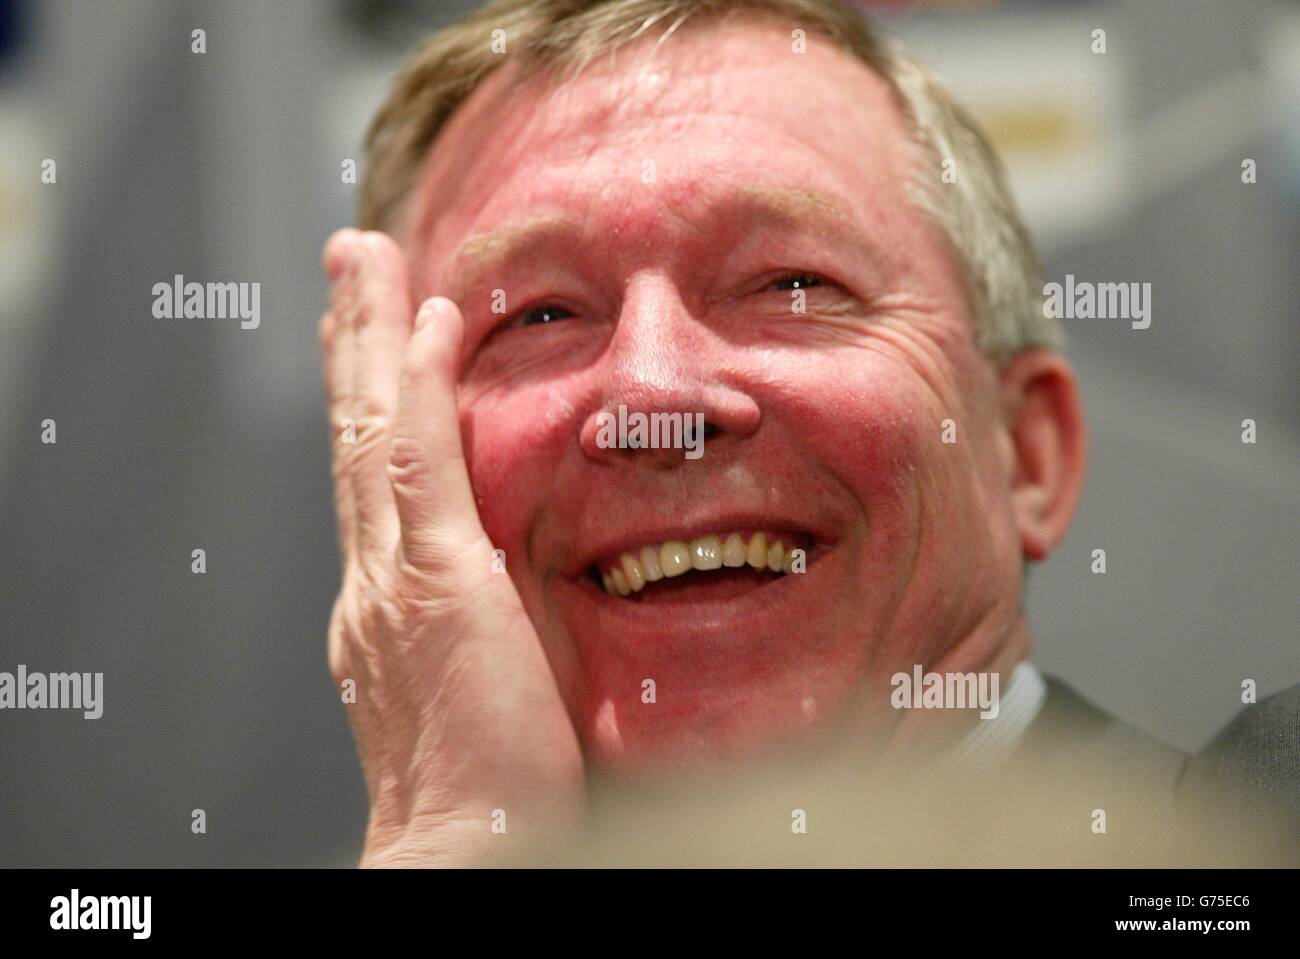 Manchester United manager Sir Alex Ferguson speaking at a press conference before tomorrow night's Champions League match against Depotivo La Coruna at Old Trafford. Stock Photo